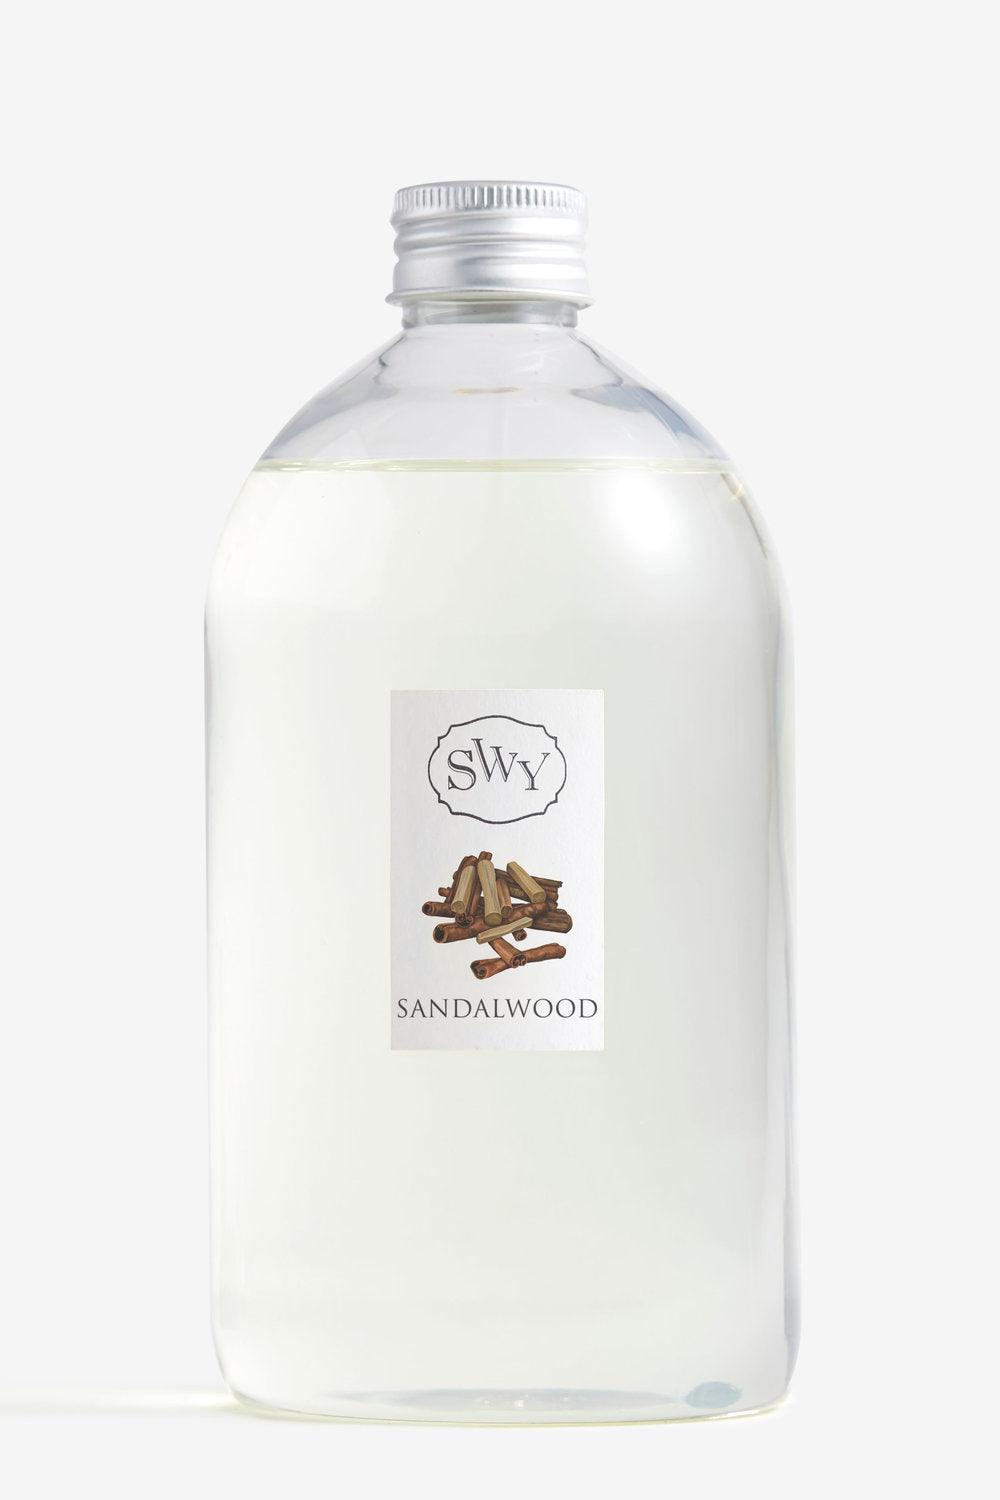 Reeds Diffuser – Sandalwood - SWY - Scent With You